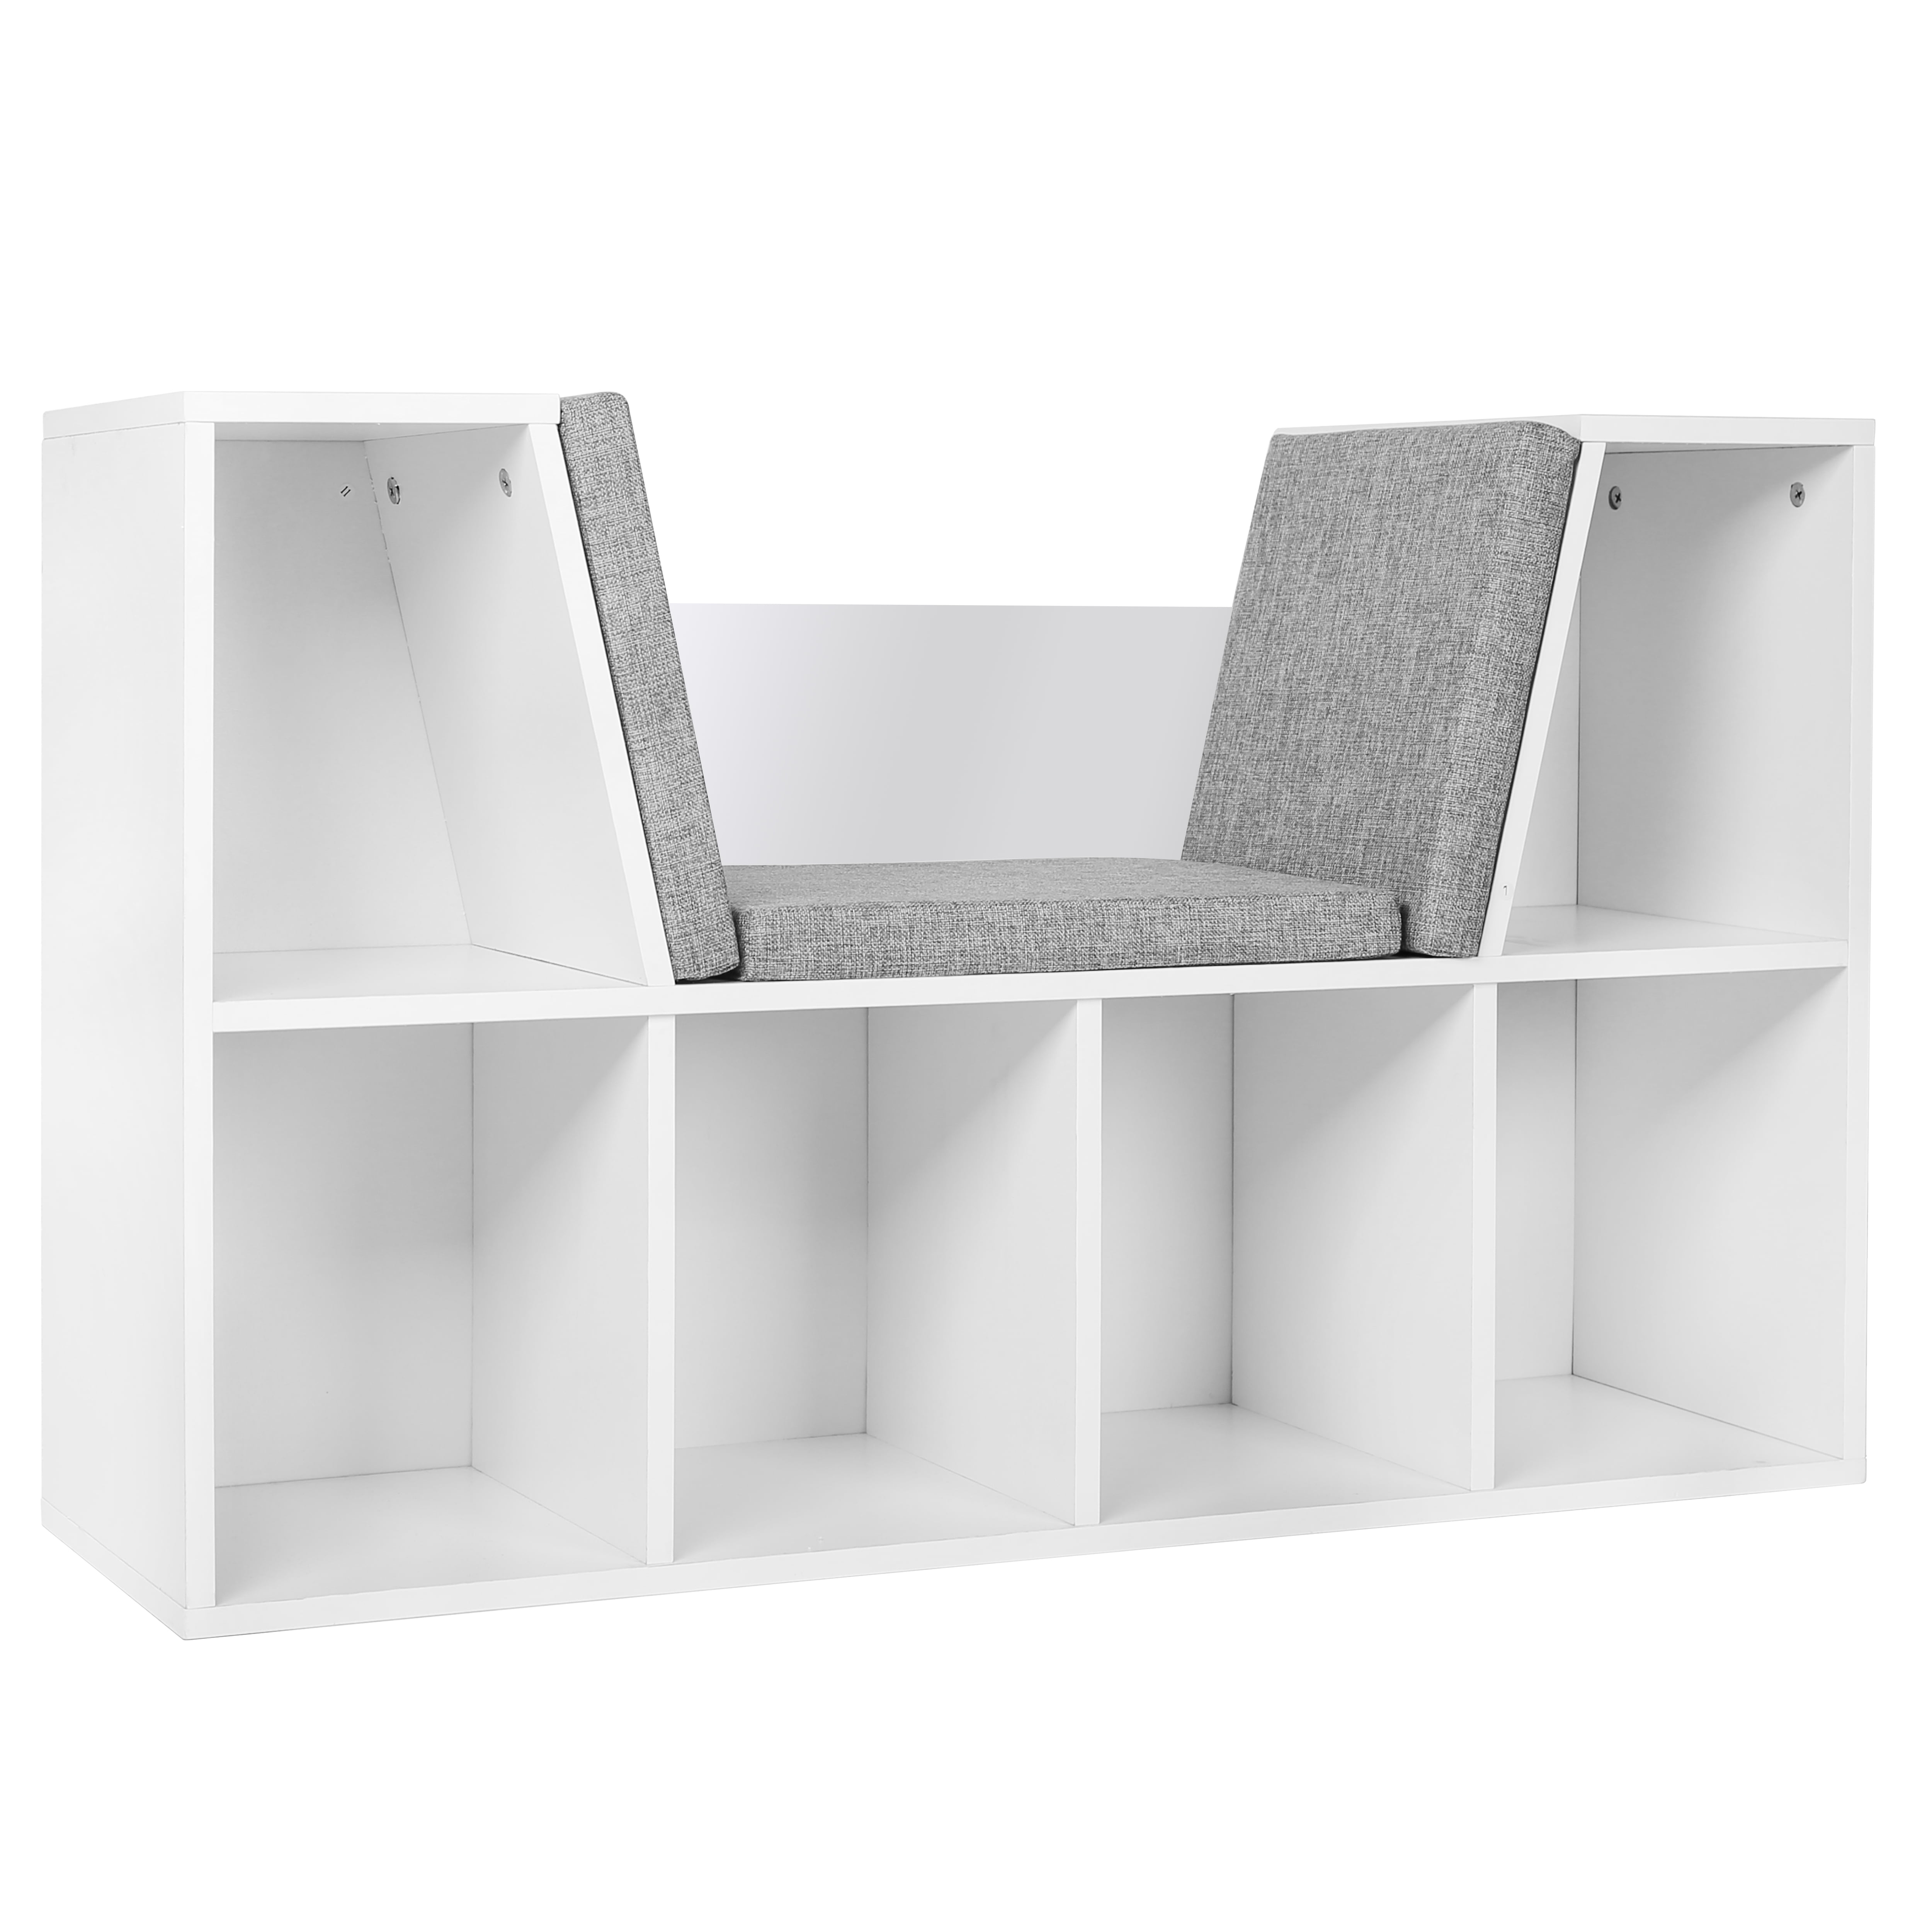 Veikous 6 Cubby Kids Reading Nook And, White Storage Bookcase